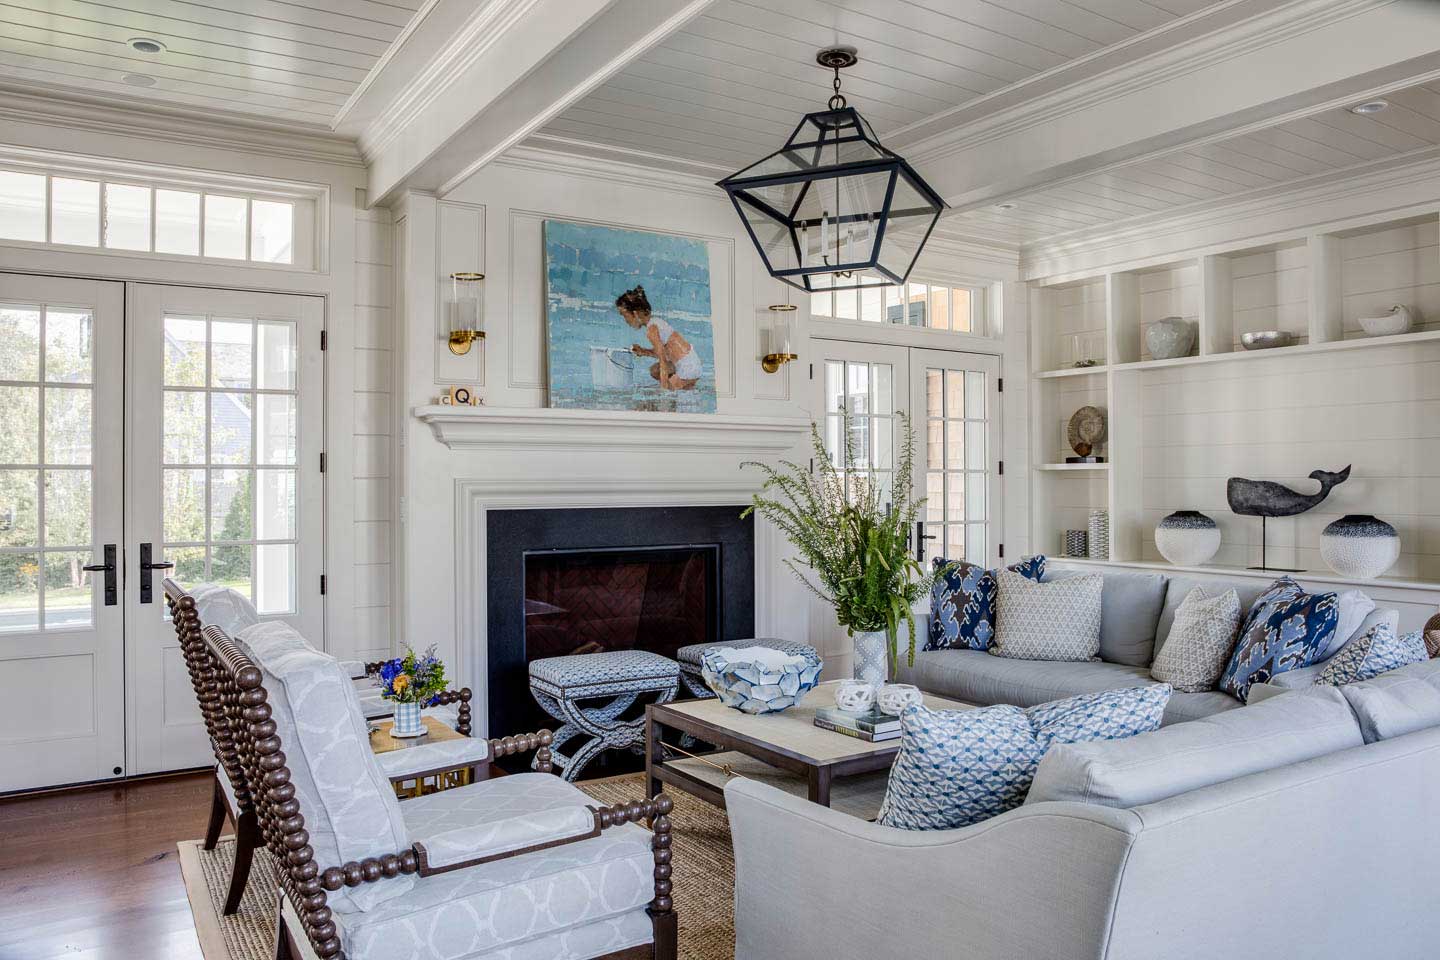 This New England home is the poster child for "coastal chic."